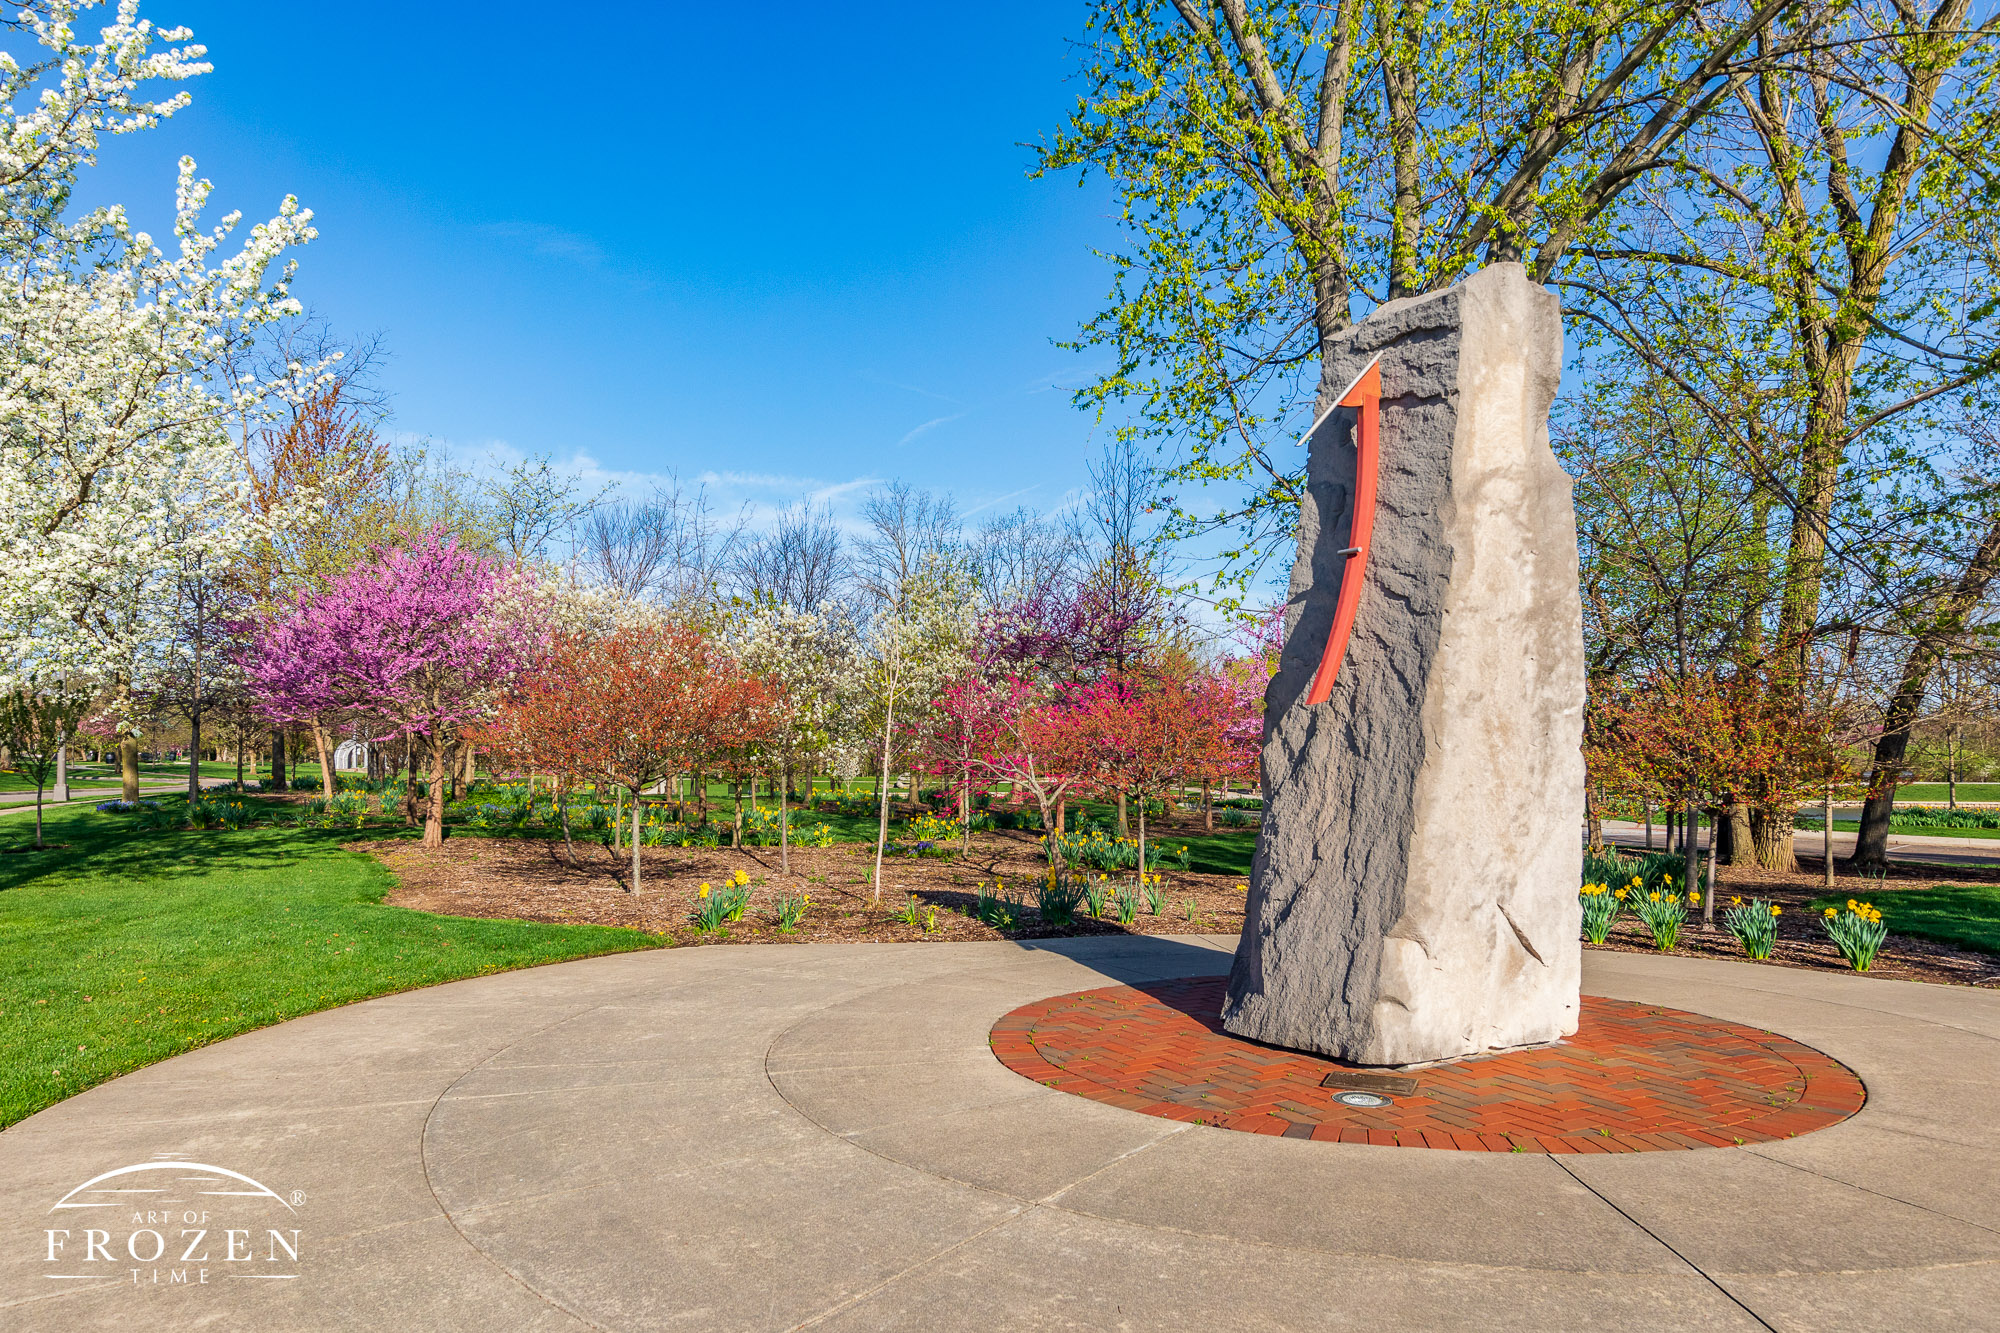 A vertical sundial mounted to a large stone which resides in a small plaza surrounded by blooming trees and daffodils.